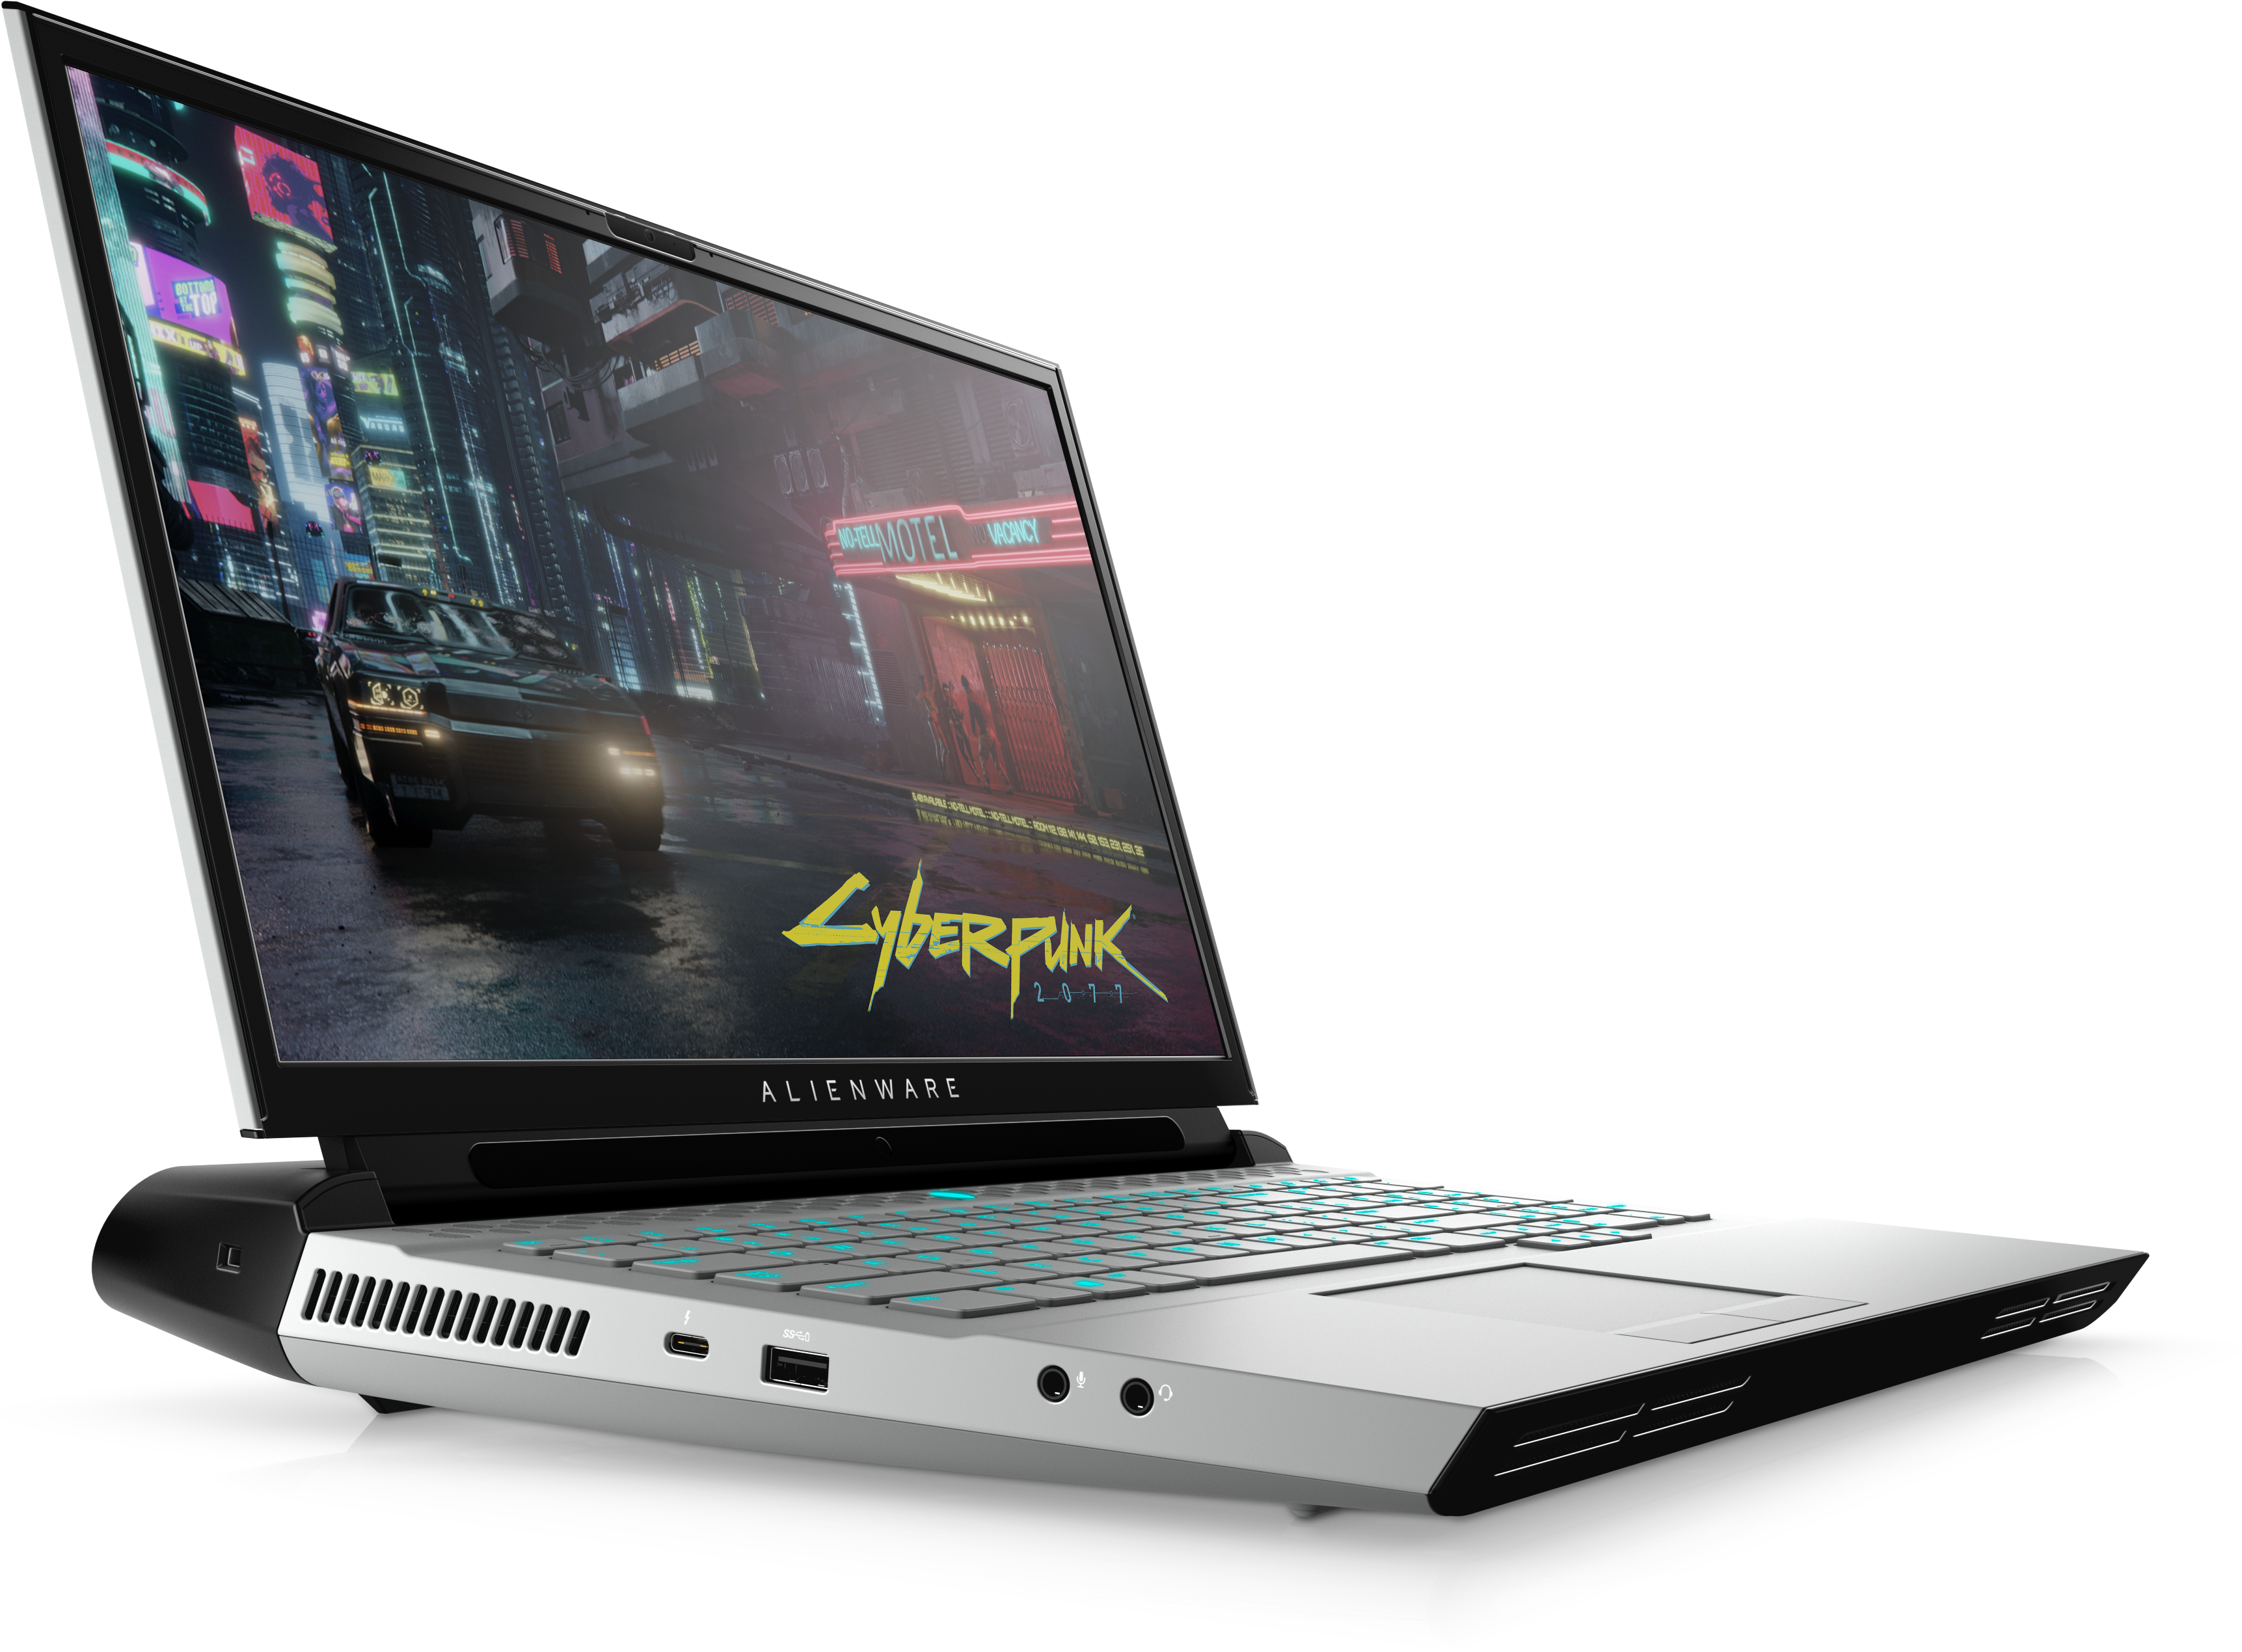 Dell Alienware Area 51m R2 Lands With Up To Core I9 Comet Lake S Processors An Nvidia Geforce Rtx 80 Super 64 Gb Of Ram 4 Tb Of Storage A 300 Hz Ips Display